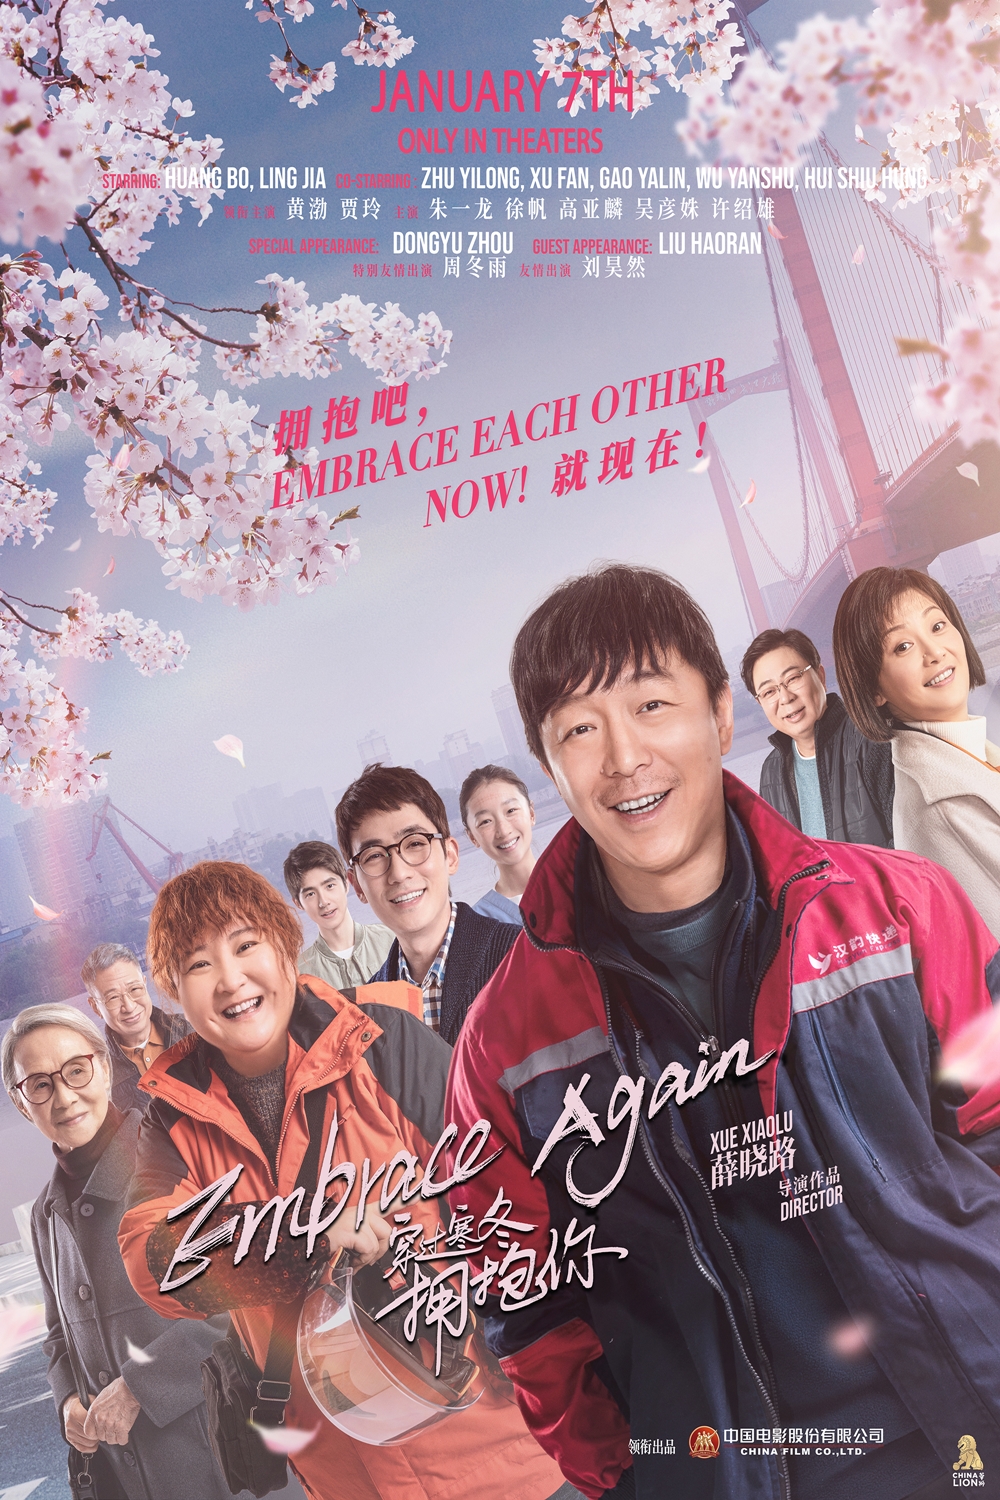 Embrace Again (W/ English and Chinese Subtitles) Tickets & Showtimes